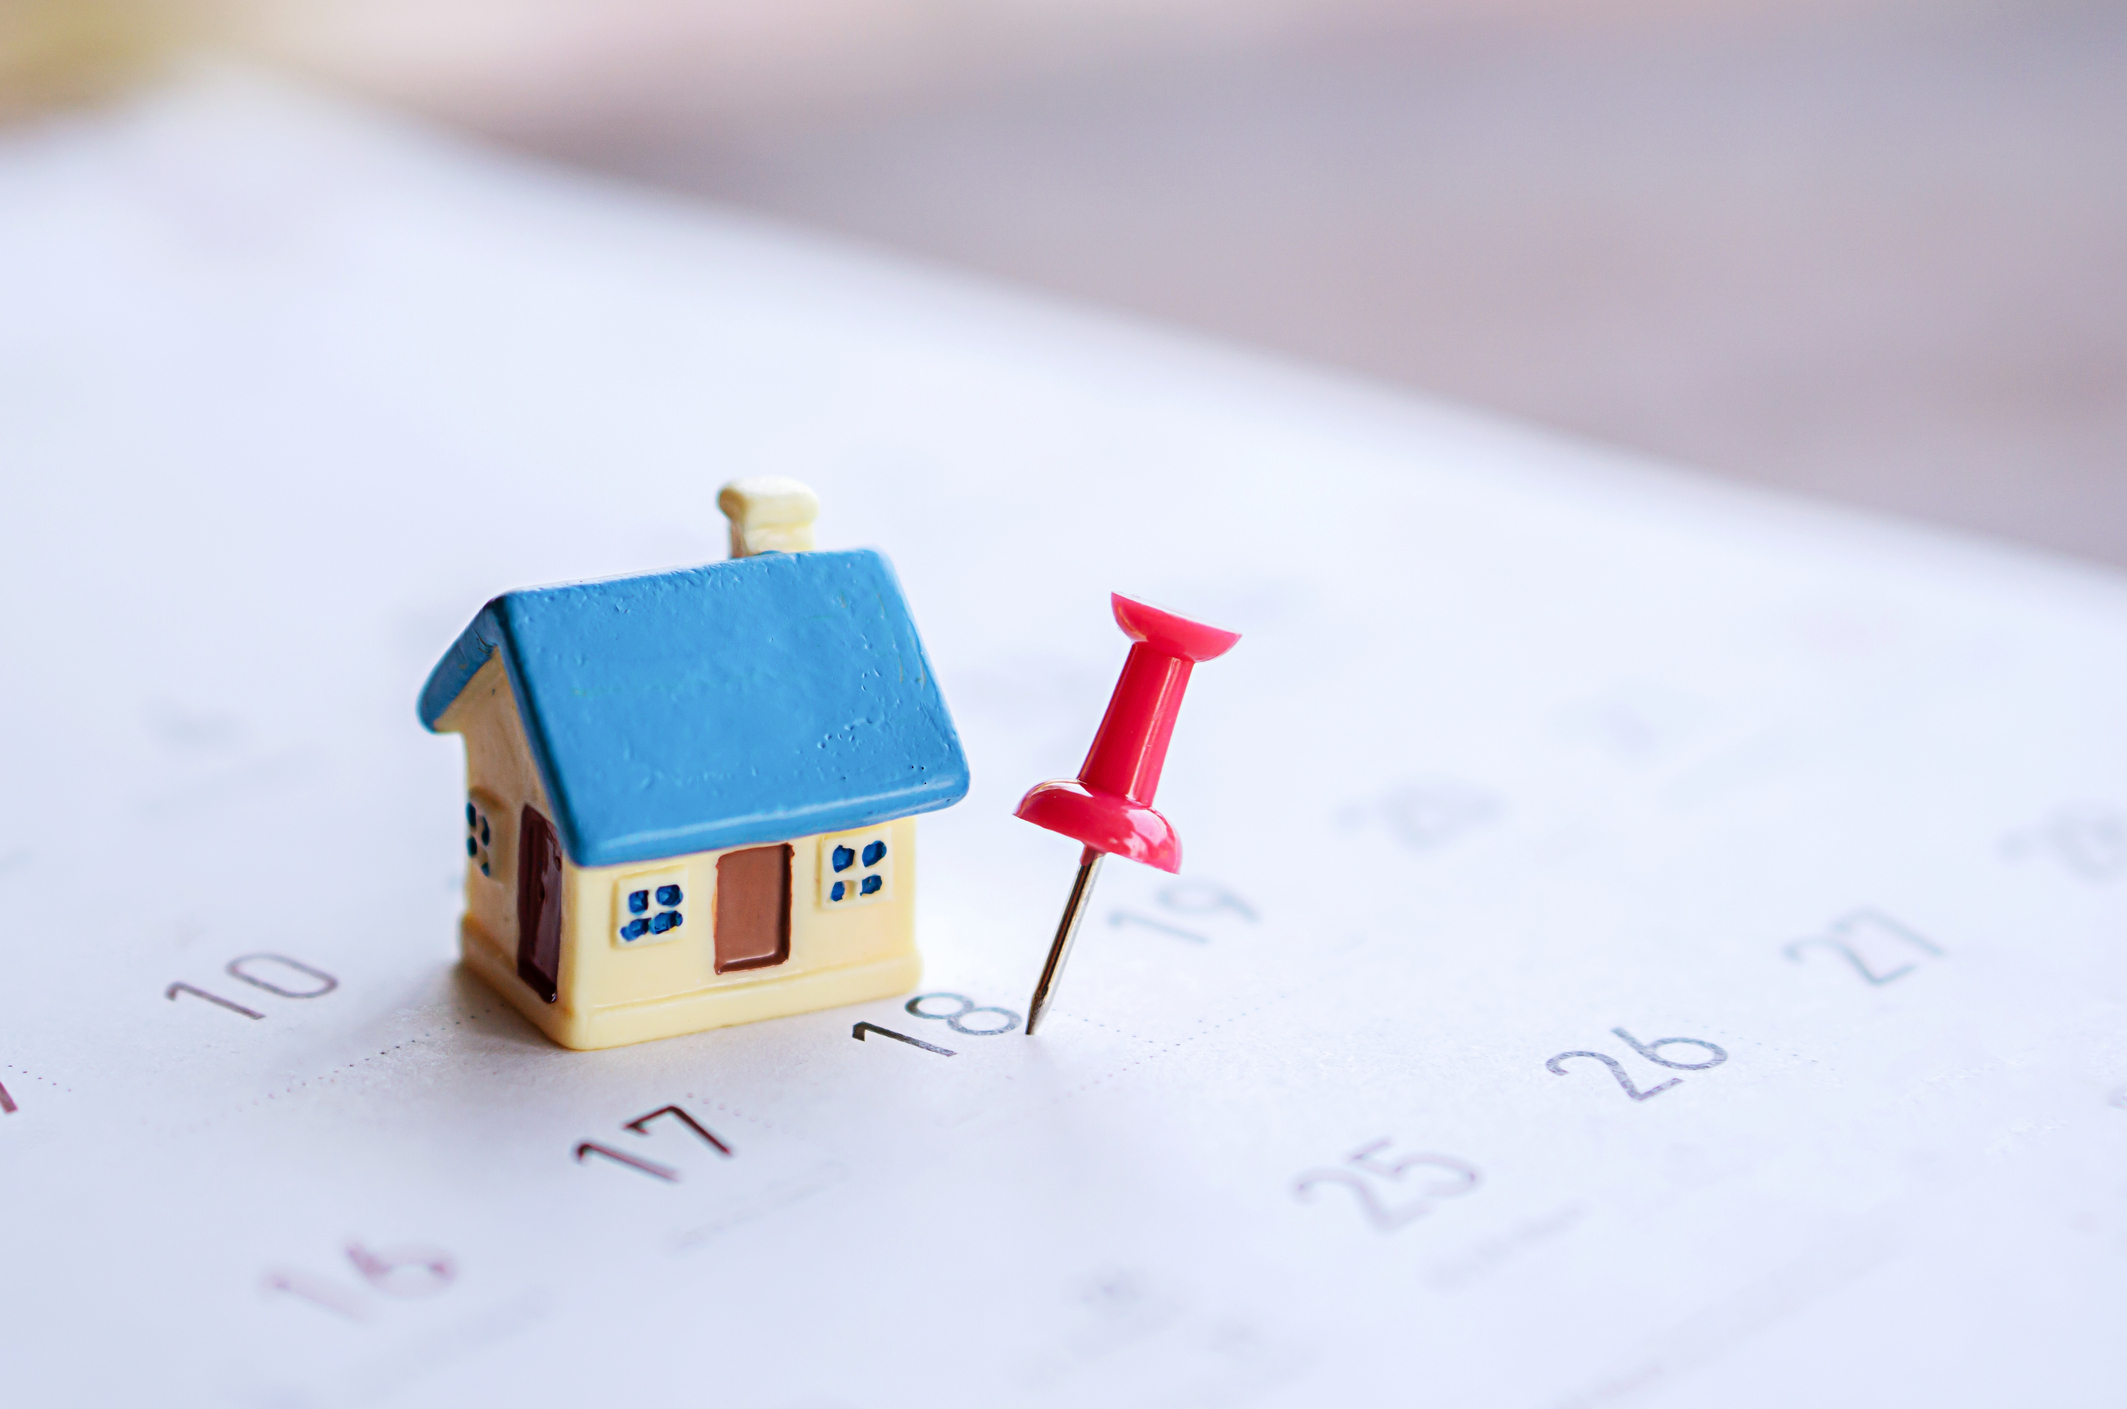 A small house figurine with a blue roof sits on top of a calendar with a red thumbtack stuck on the date of the 18th.